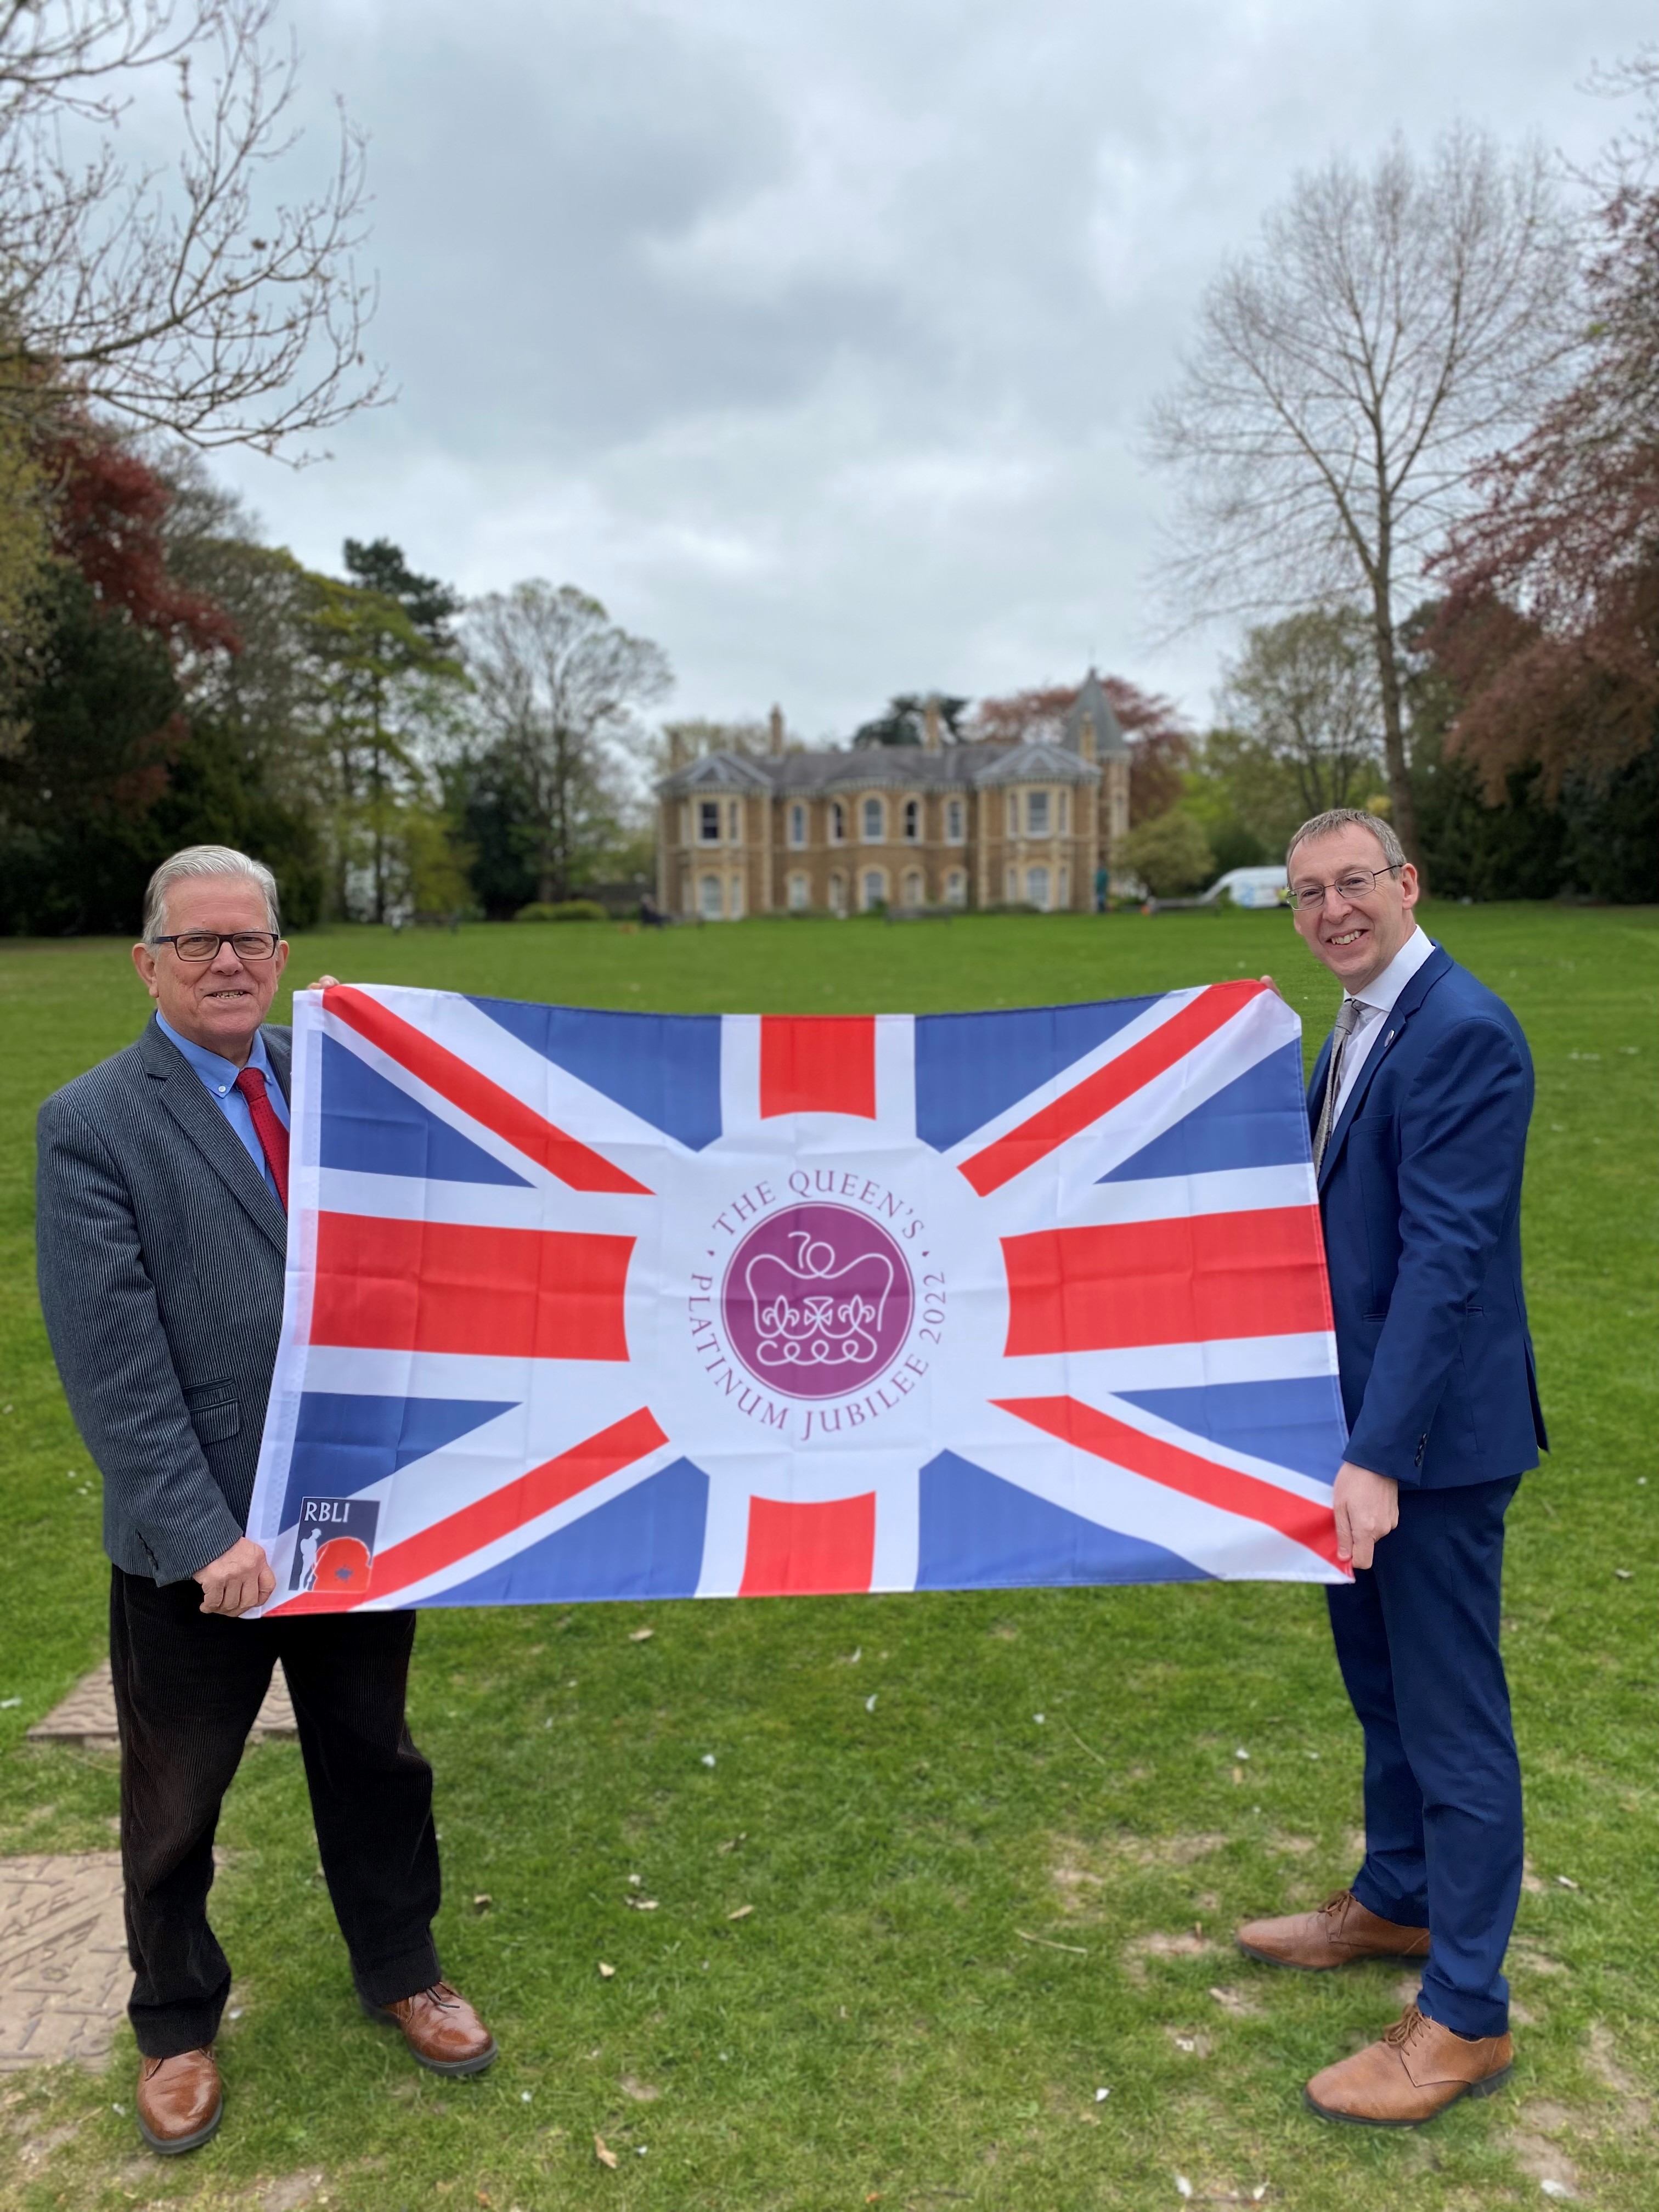 John and Mike standing with a flag outside arnot hill house